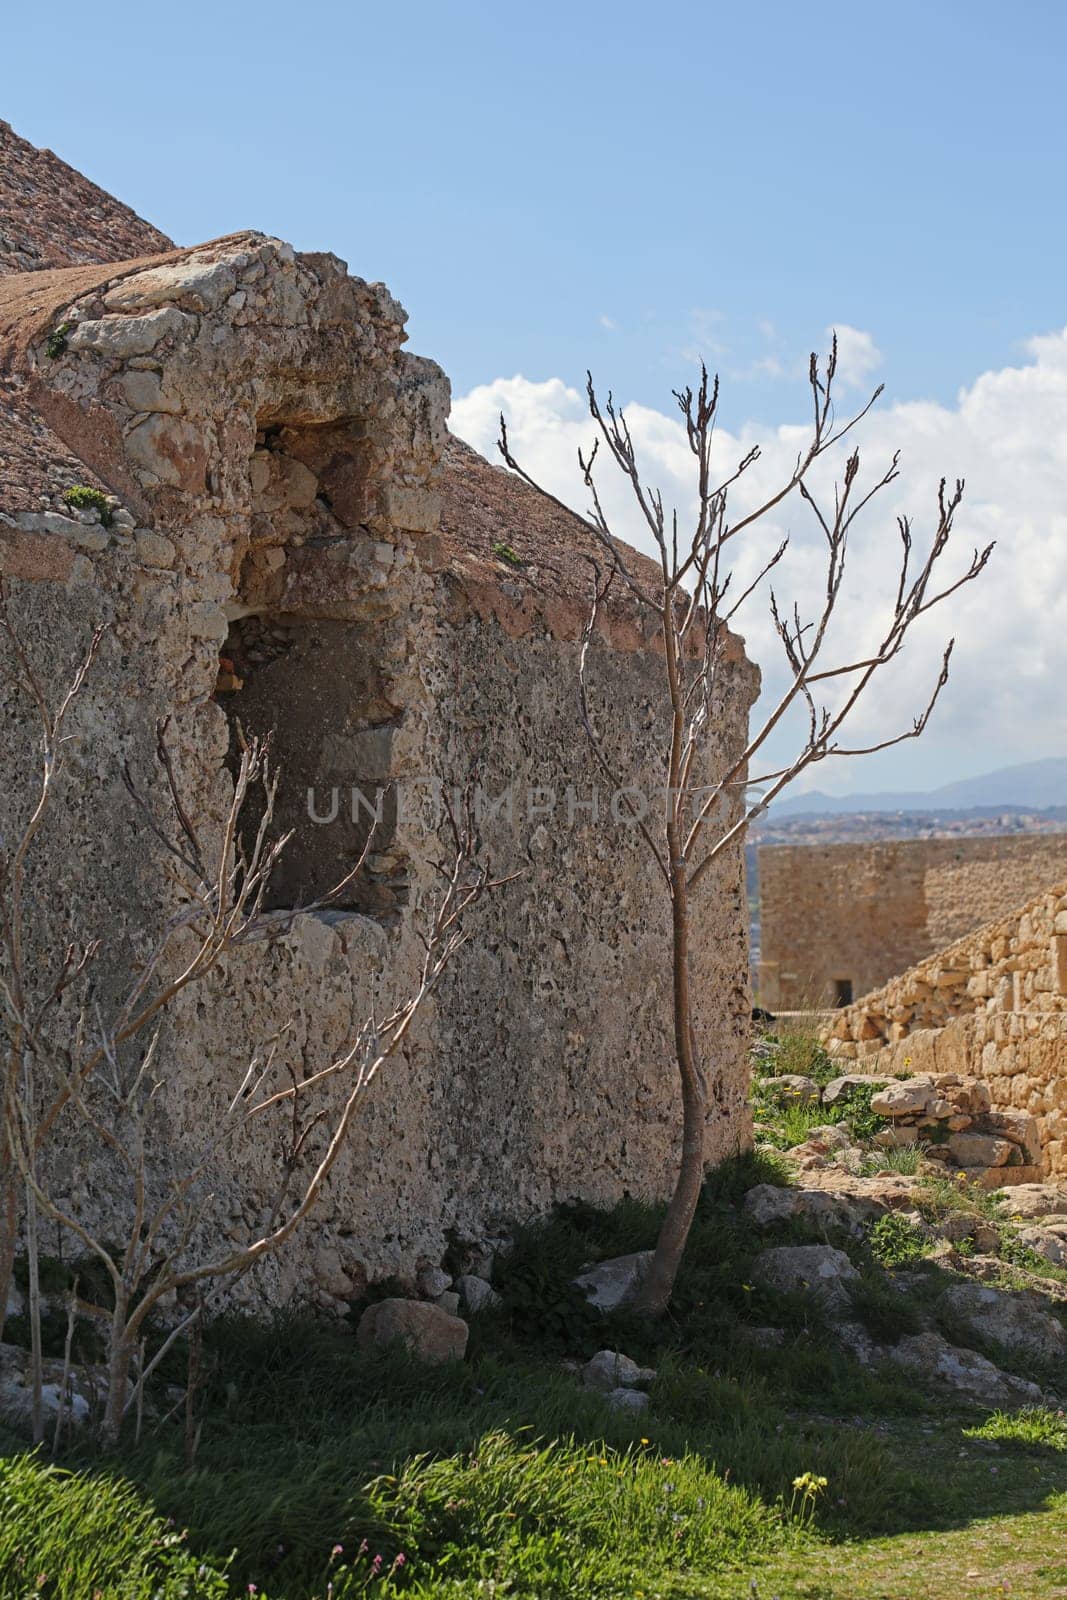 Fortezza fortress castle in Crete island holidays exploring the old ancient stone city monuments close up summer background carnival season high quality big size printings